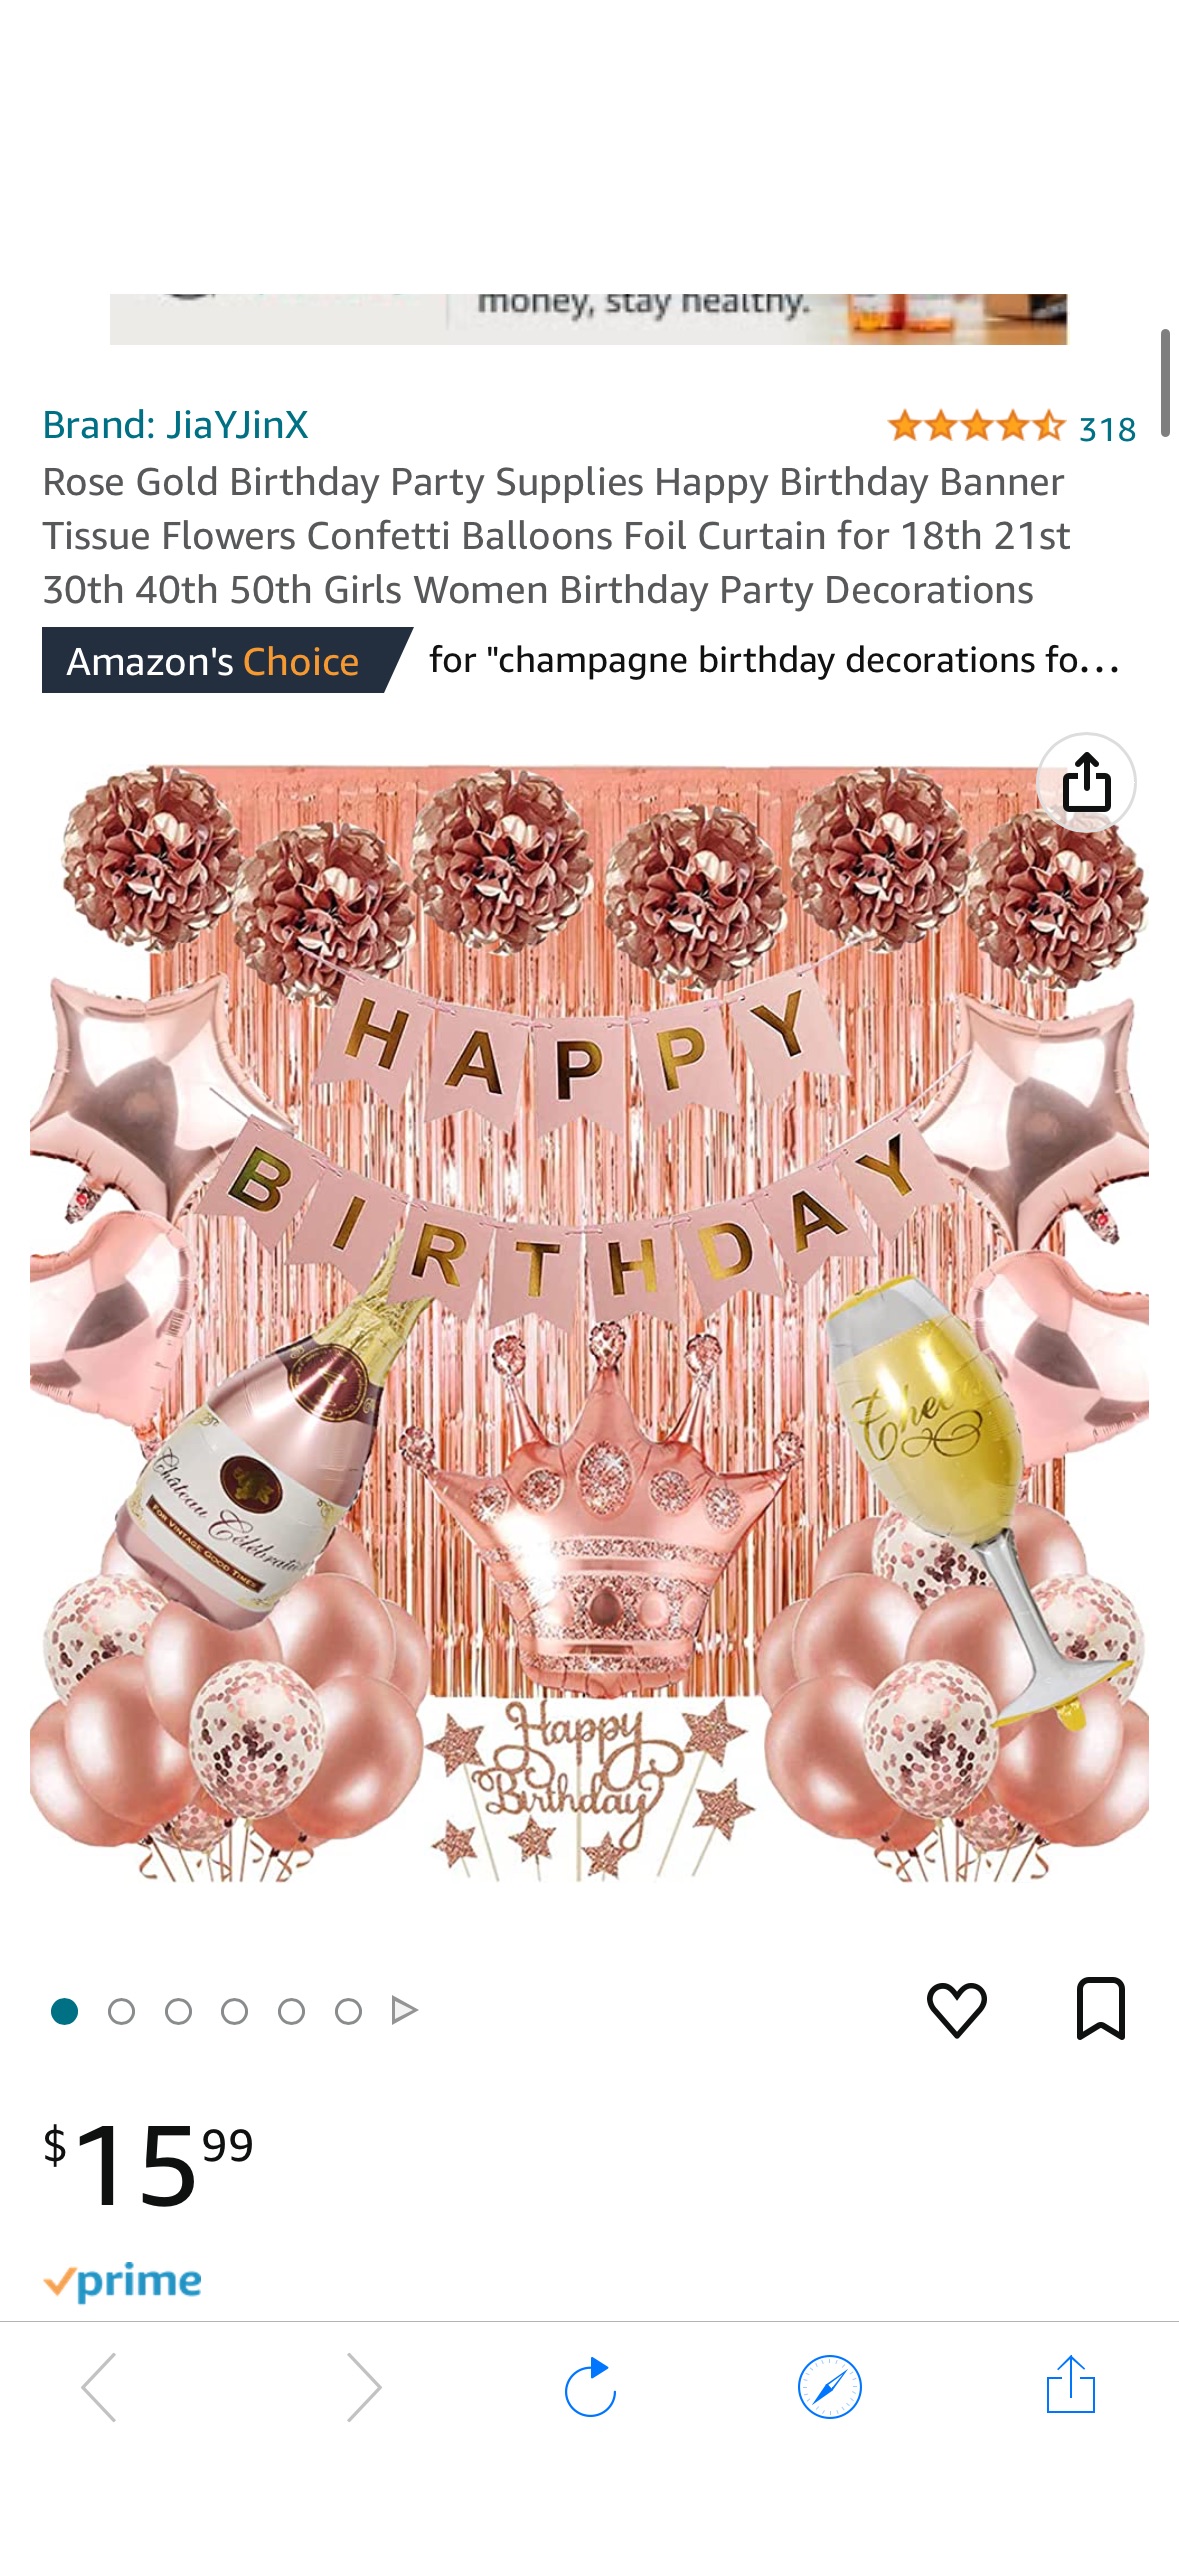 Amazon.com: Rose Gold Birthday Party Supplies Happy Birthday Banner Tissue Flowers Confetti Balloons Foil Curtain